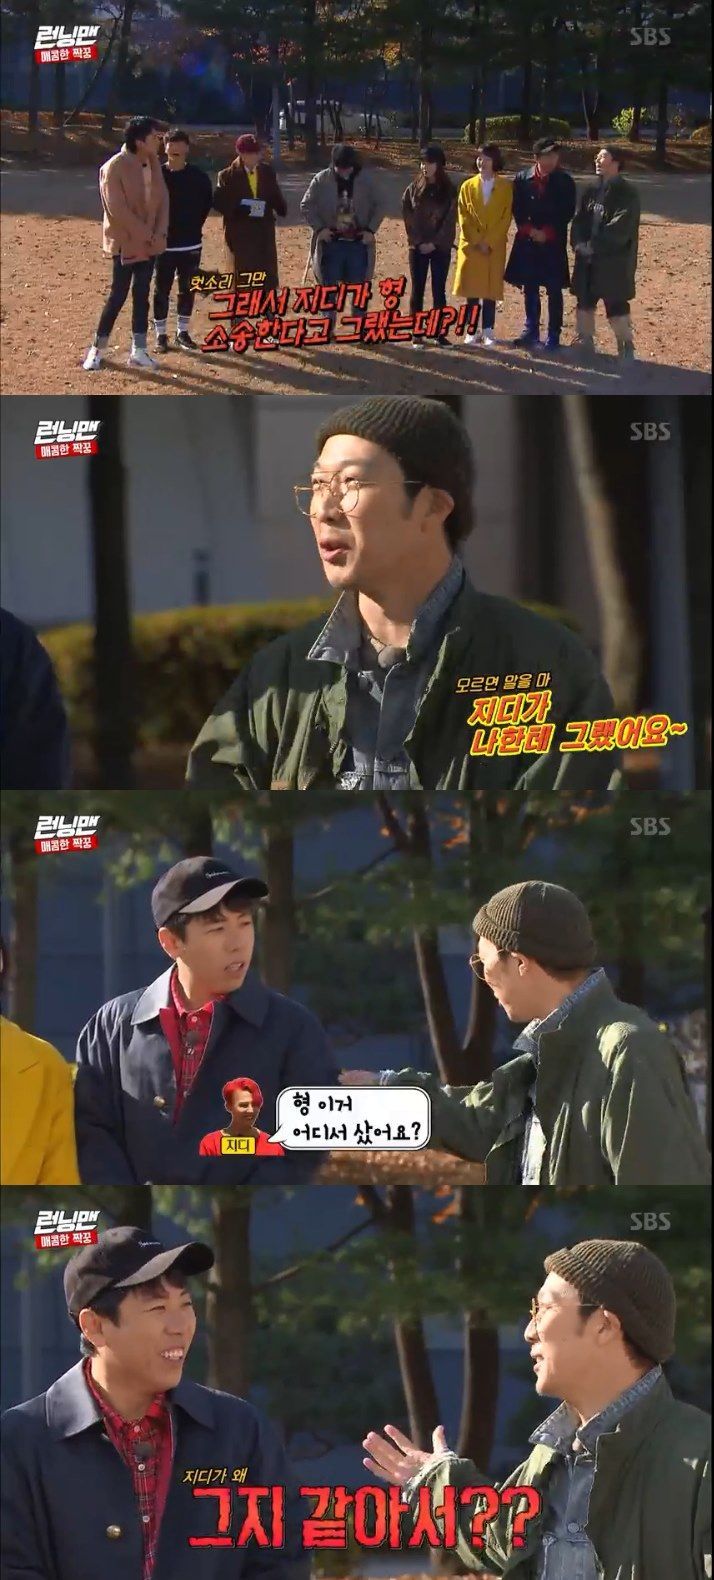 <p>2 days broadcast SBS Running Manin Running Man sister group TWICE the entire guest to scramble. TWICE in the last 4 Julys people X as joined 1 year anniversary’ special guest surprise appearances by school the and comic dance showdown, such as the active with numerous topics to give birth, and the ‘Running Man’ Year of the pandas, star-crowned.</p><p>This day TWICE, prior to the opening in the member is in torque. Haha, the fashion for self-esteem and when one is tired with the fashion of the articles I have,he said. In this light, so a lawsuit is not,he joked.</p><p>Haha one day, so he did. This outfit where did you get it?And Yes,he added, more as a just inand the response to laugh.</p>